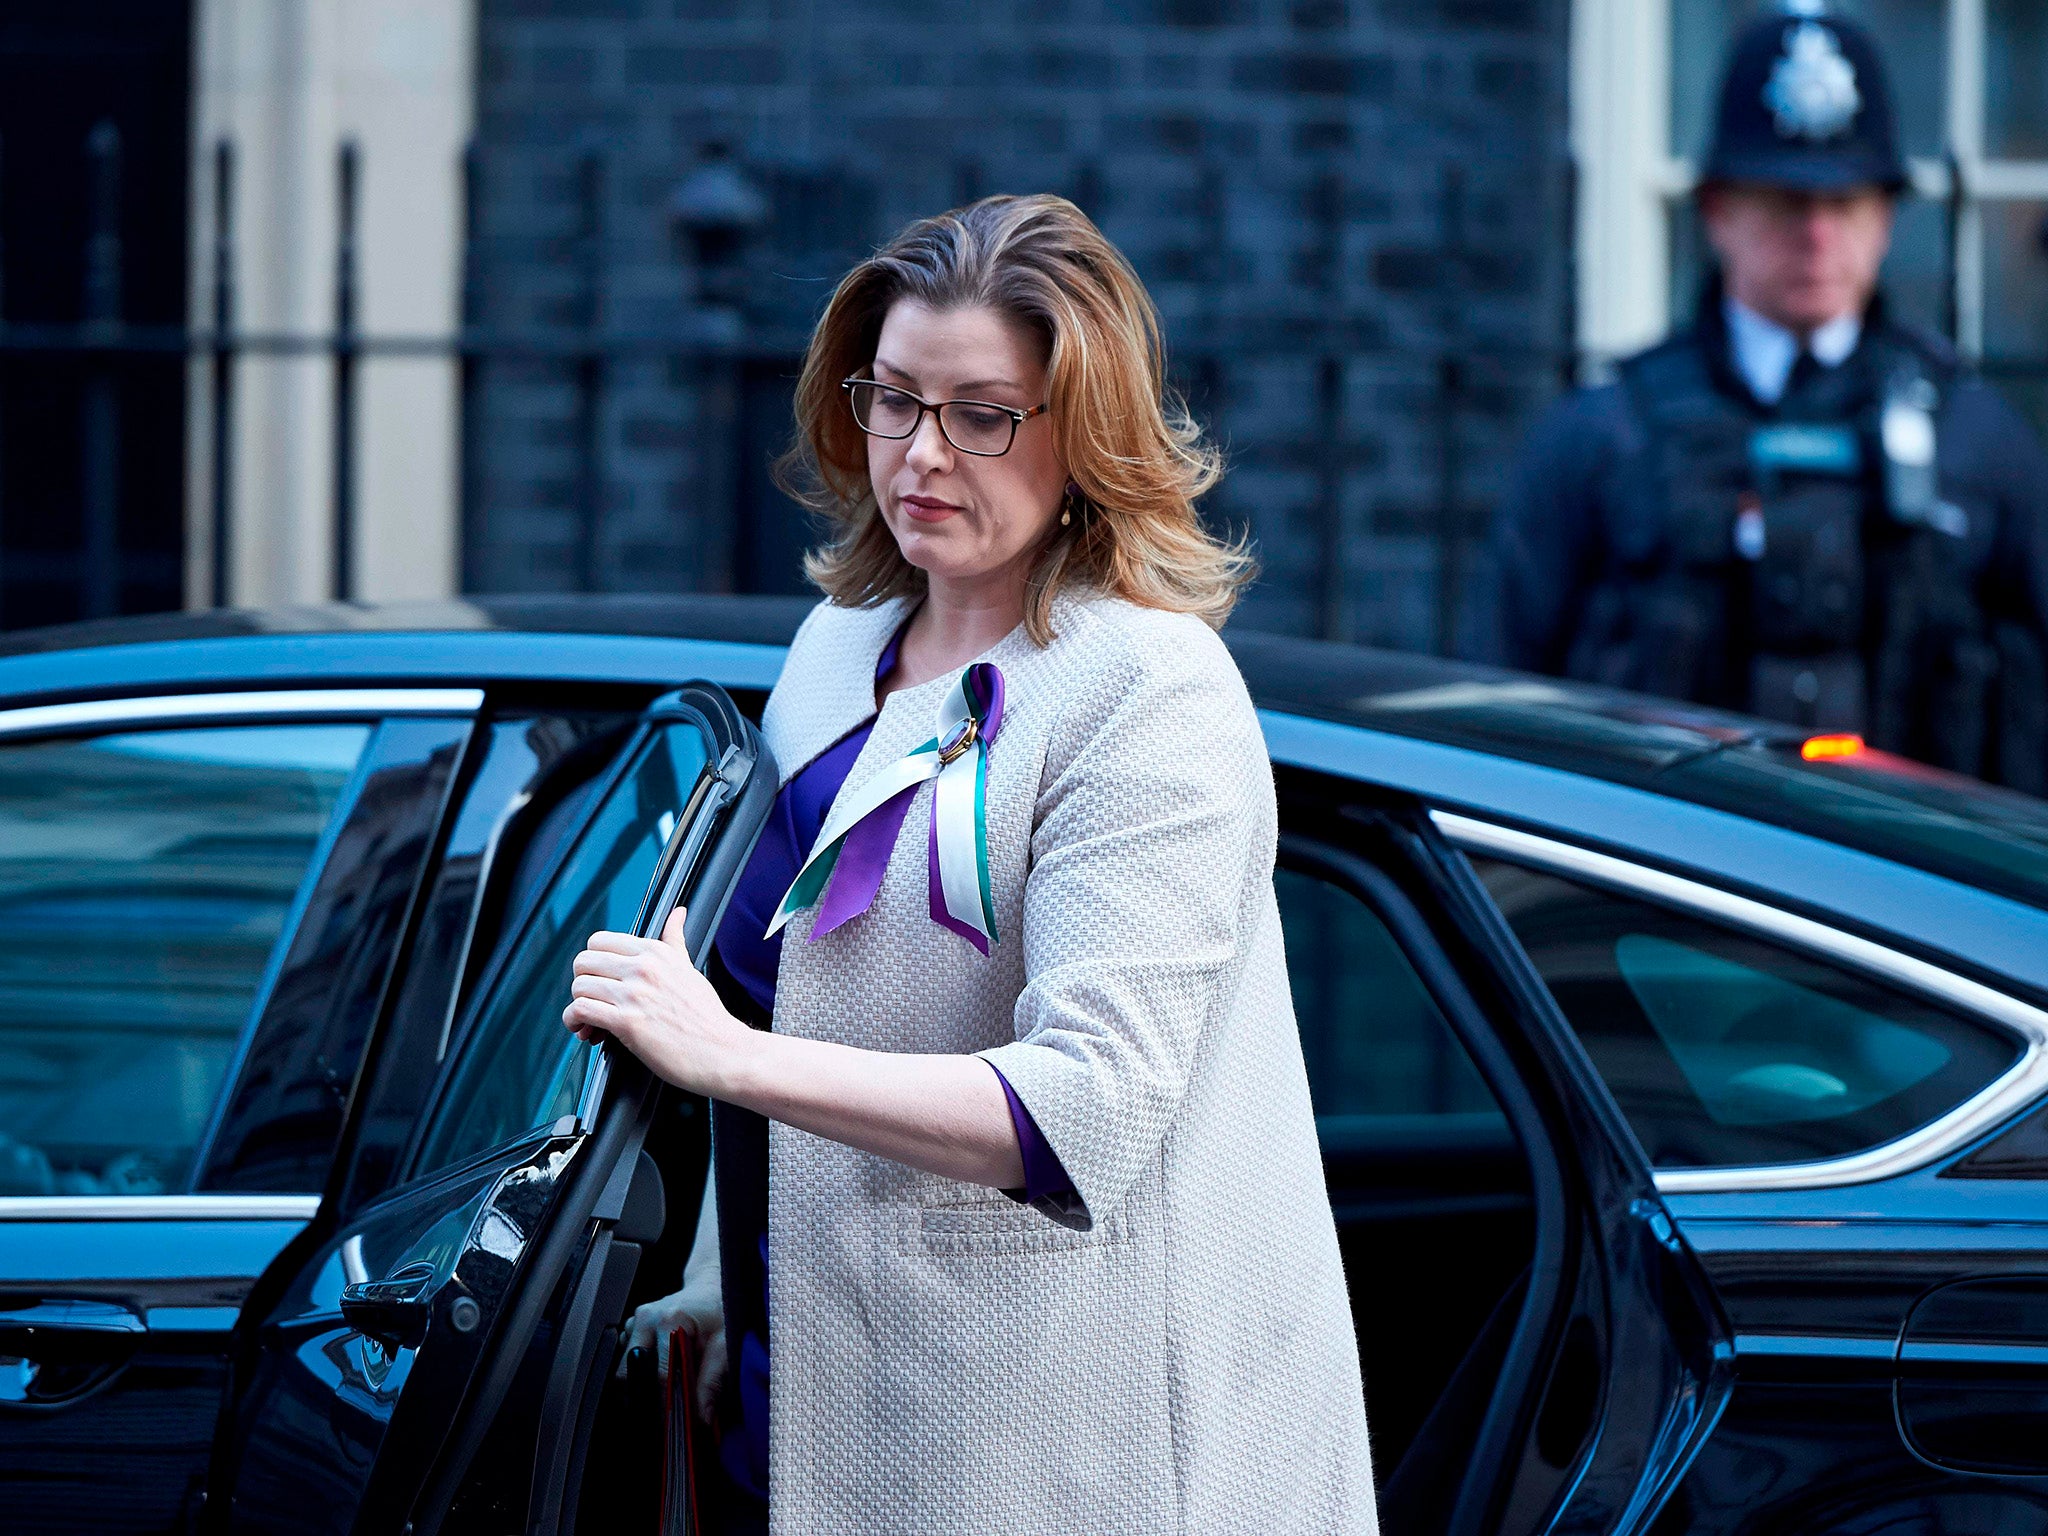 International Development Secretary Penny Mordaunt said Oxfam and other charities must show the ‘moral leadership’ to be trusted with public money